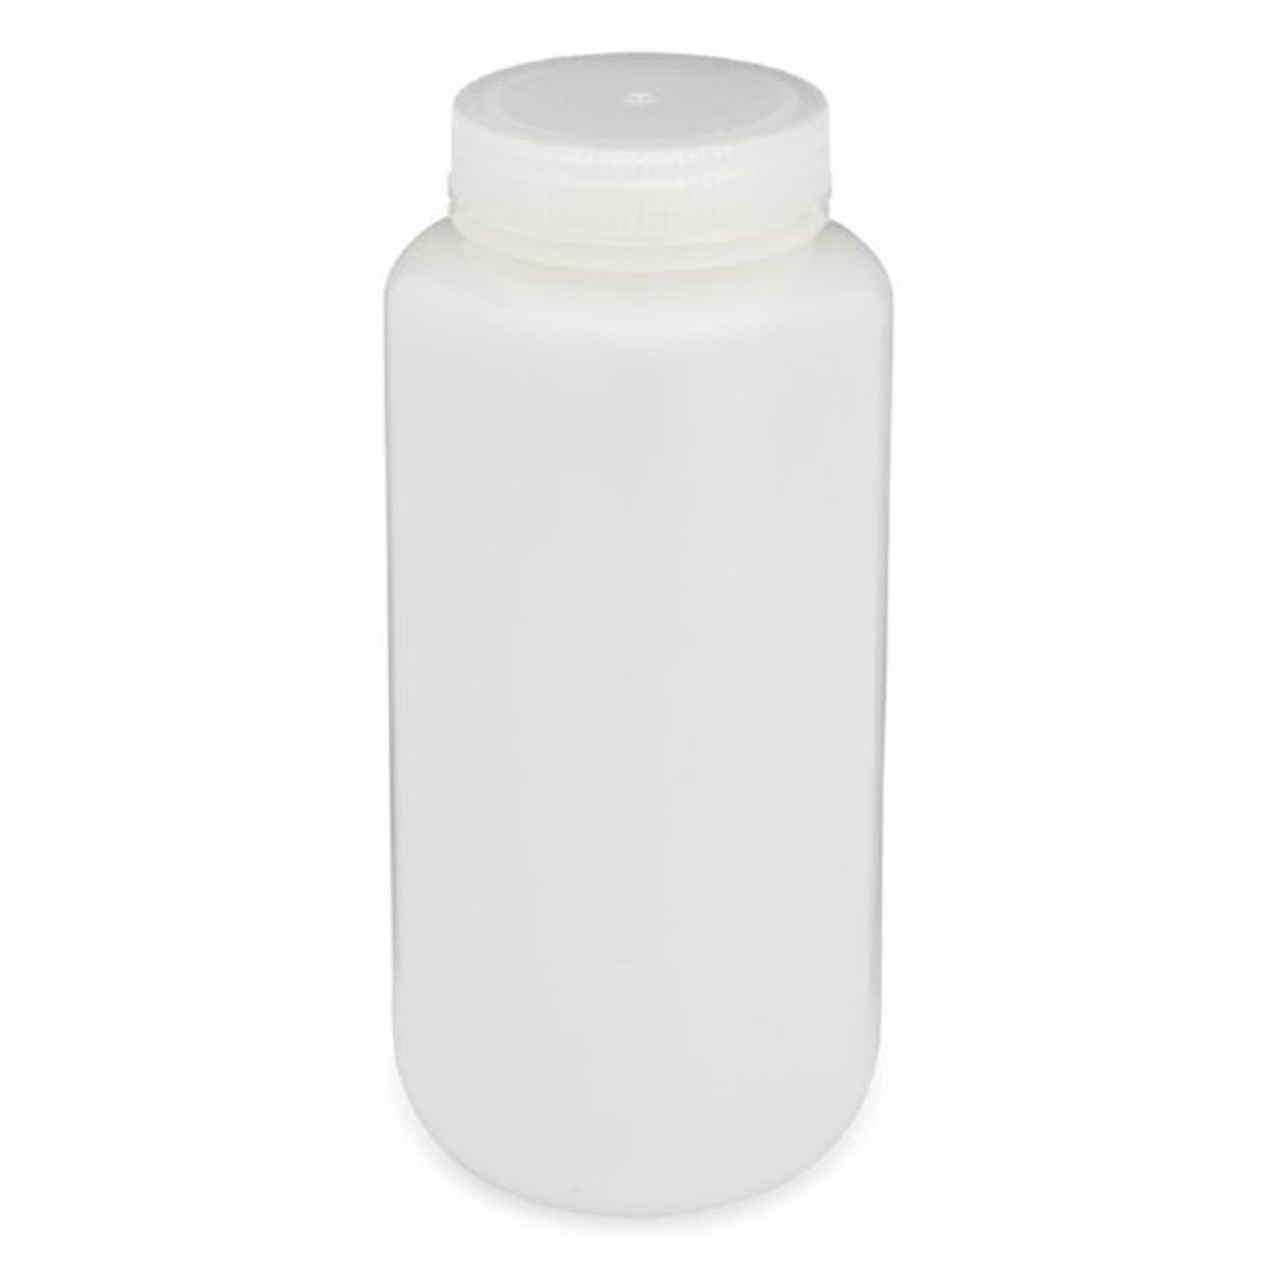 Round Protein Powder Hdpe Containers, Capacity: 100 ml